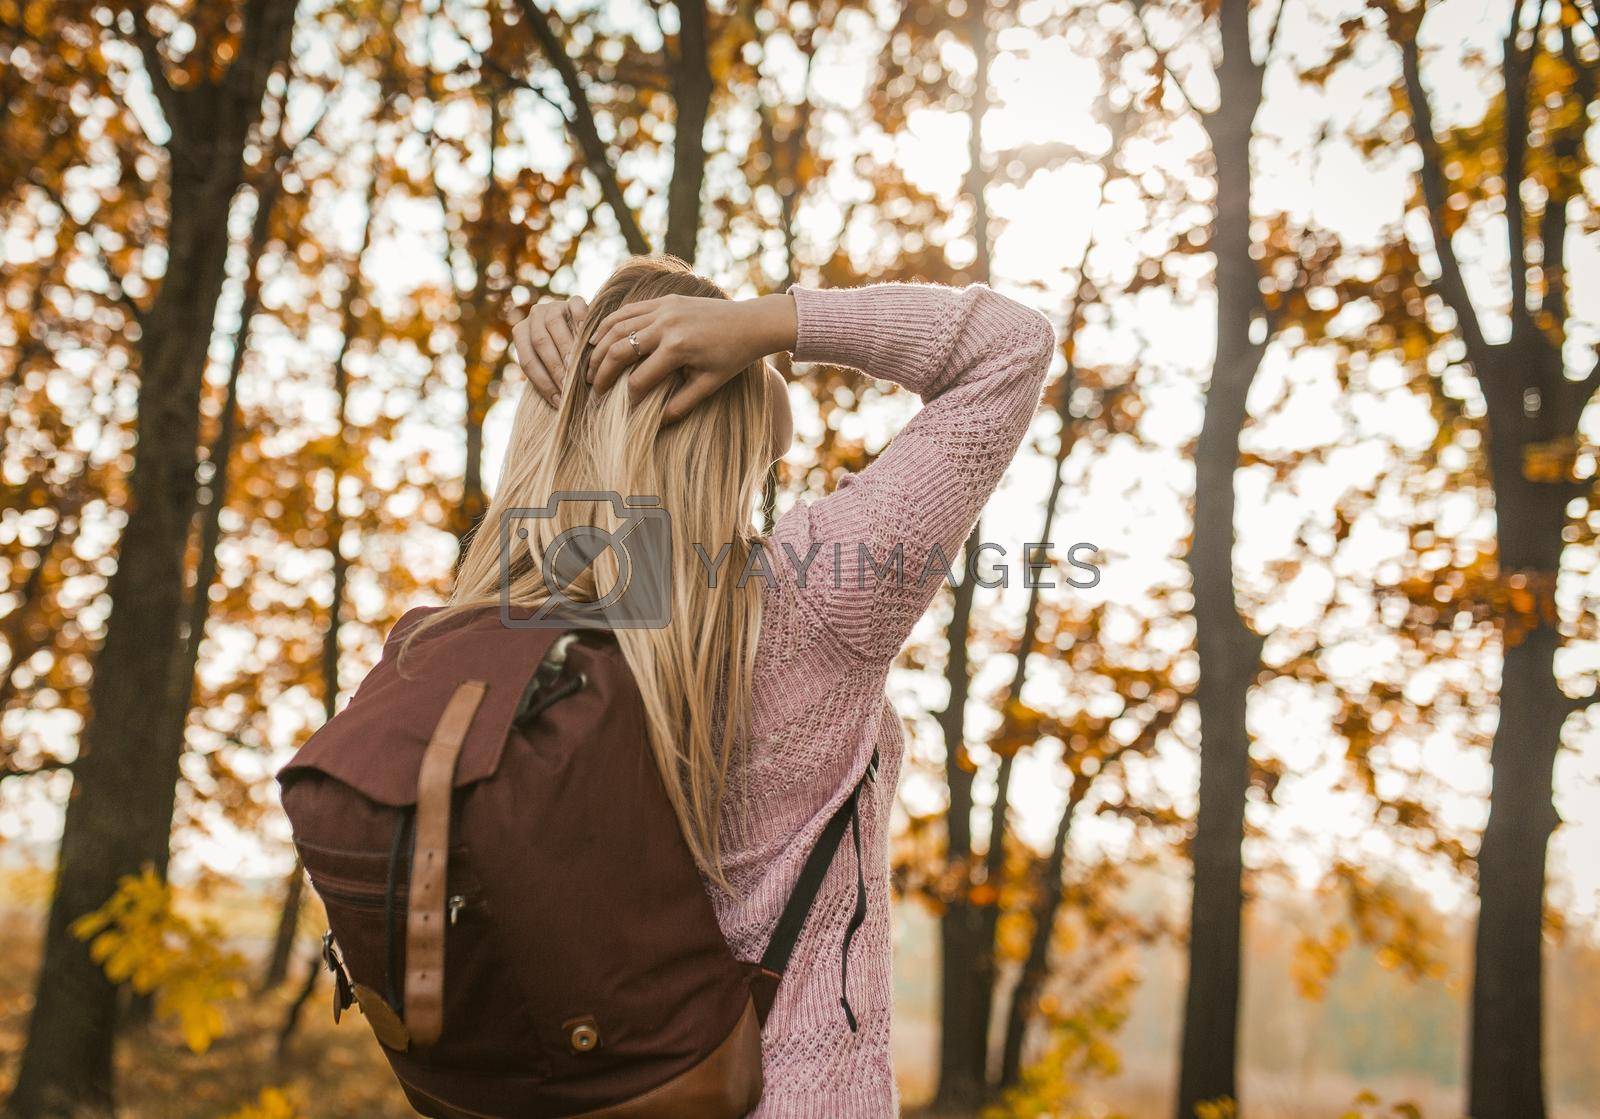 Royalty free image of Blonde Lady With Backpack Turned To Face The Sun by LipikStockMedia